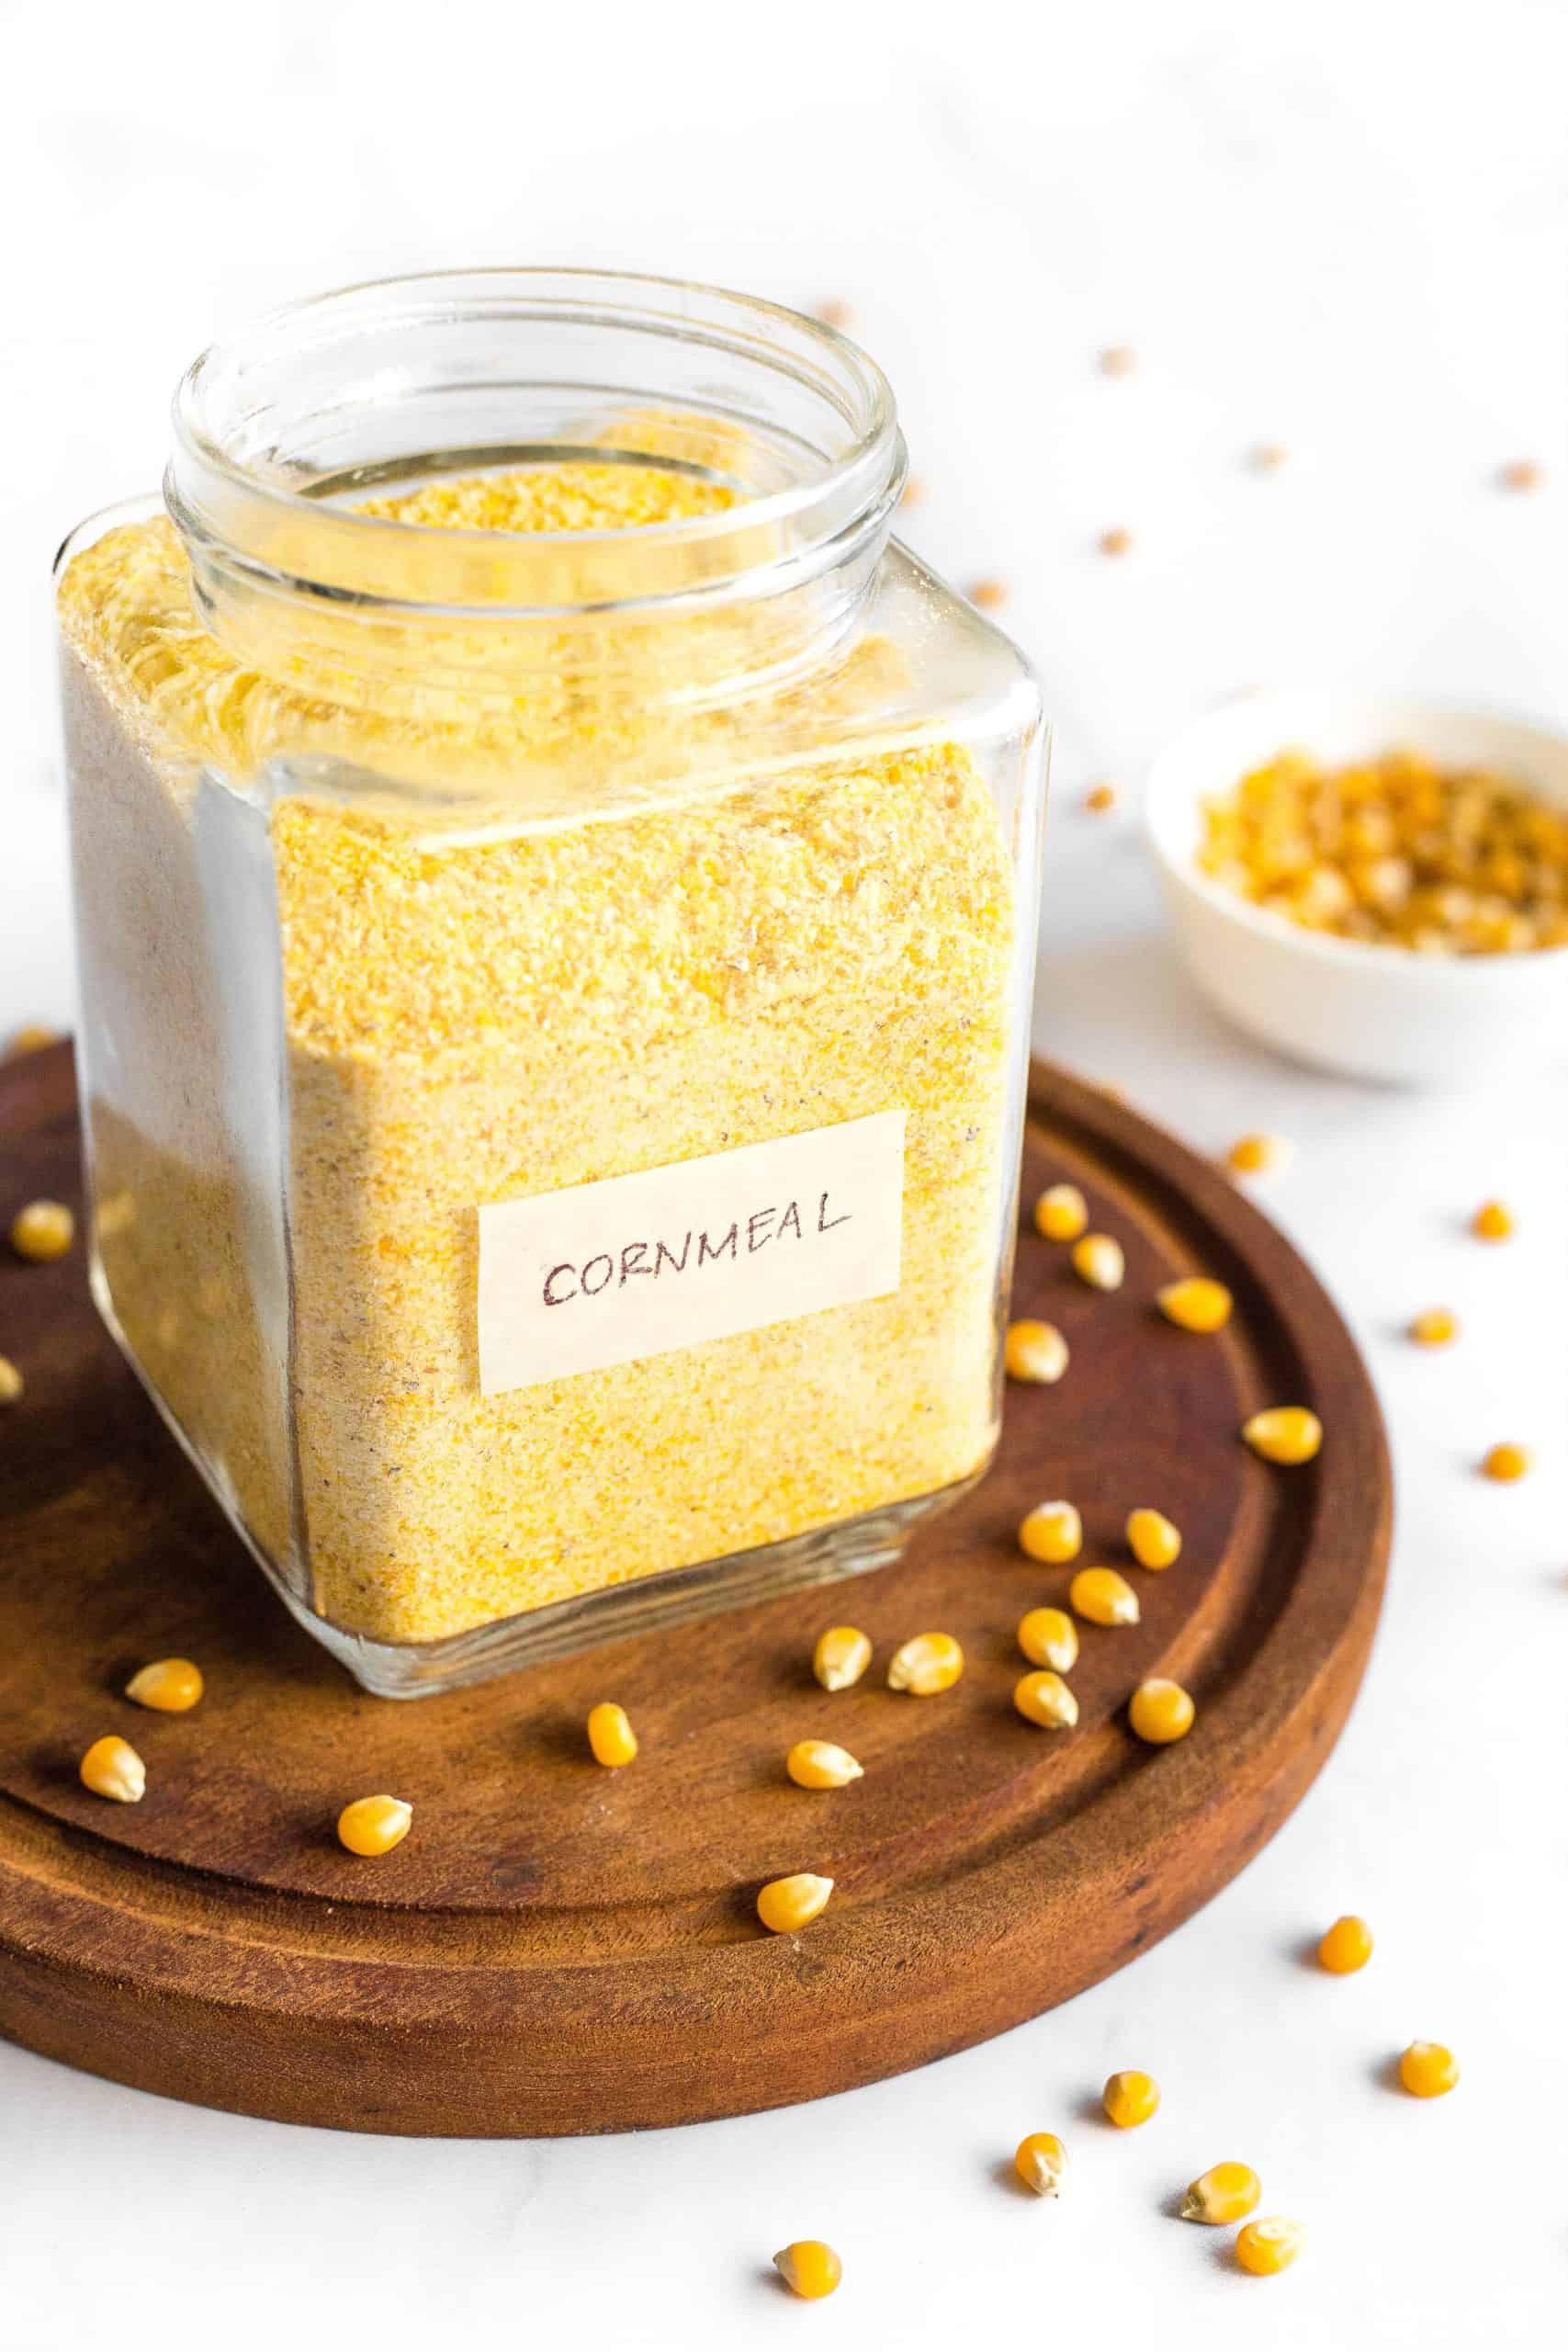 A jar of cornmeal and corn kernels on wooden board.